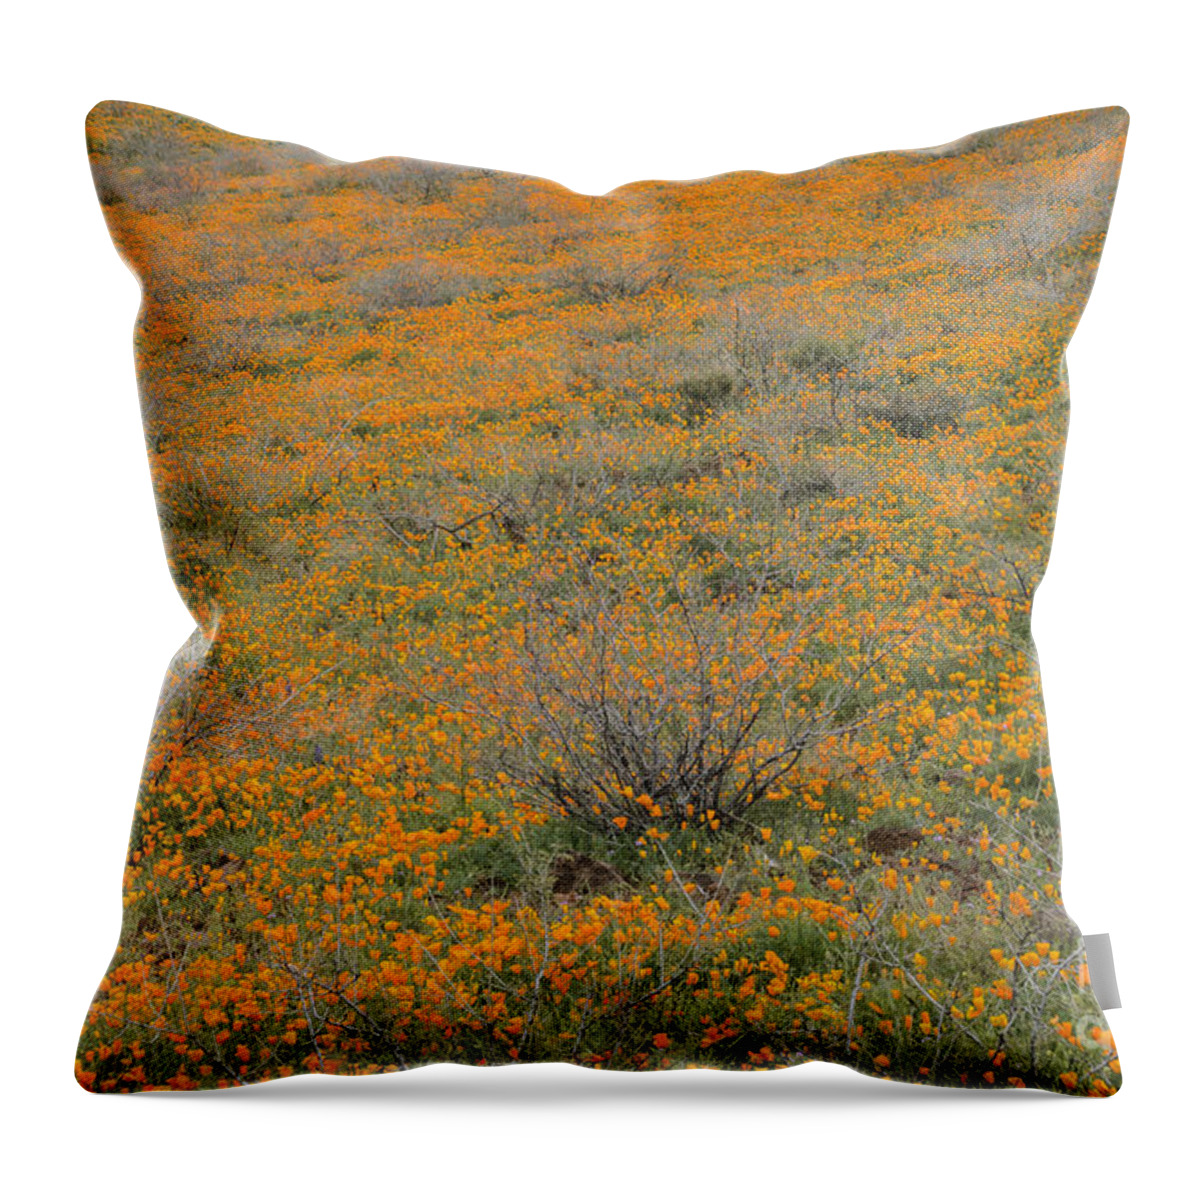 Poppies Throw Pillow featuring the photograph Field of Poppies by Tamara Becker